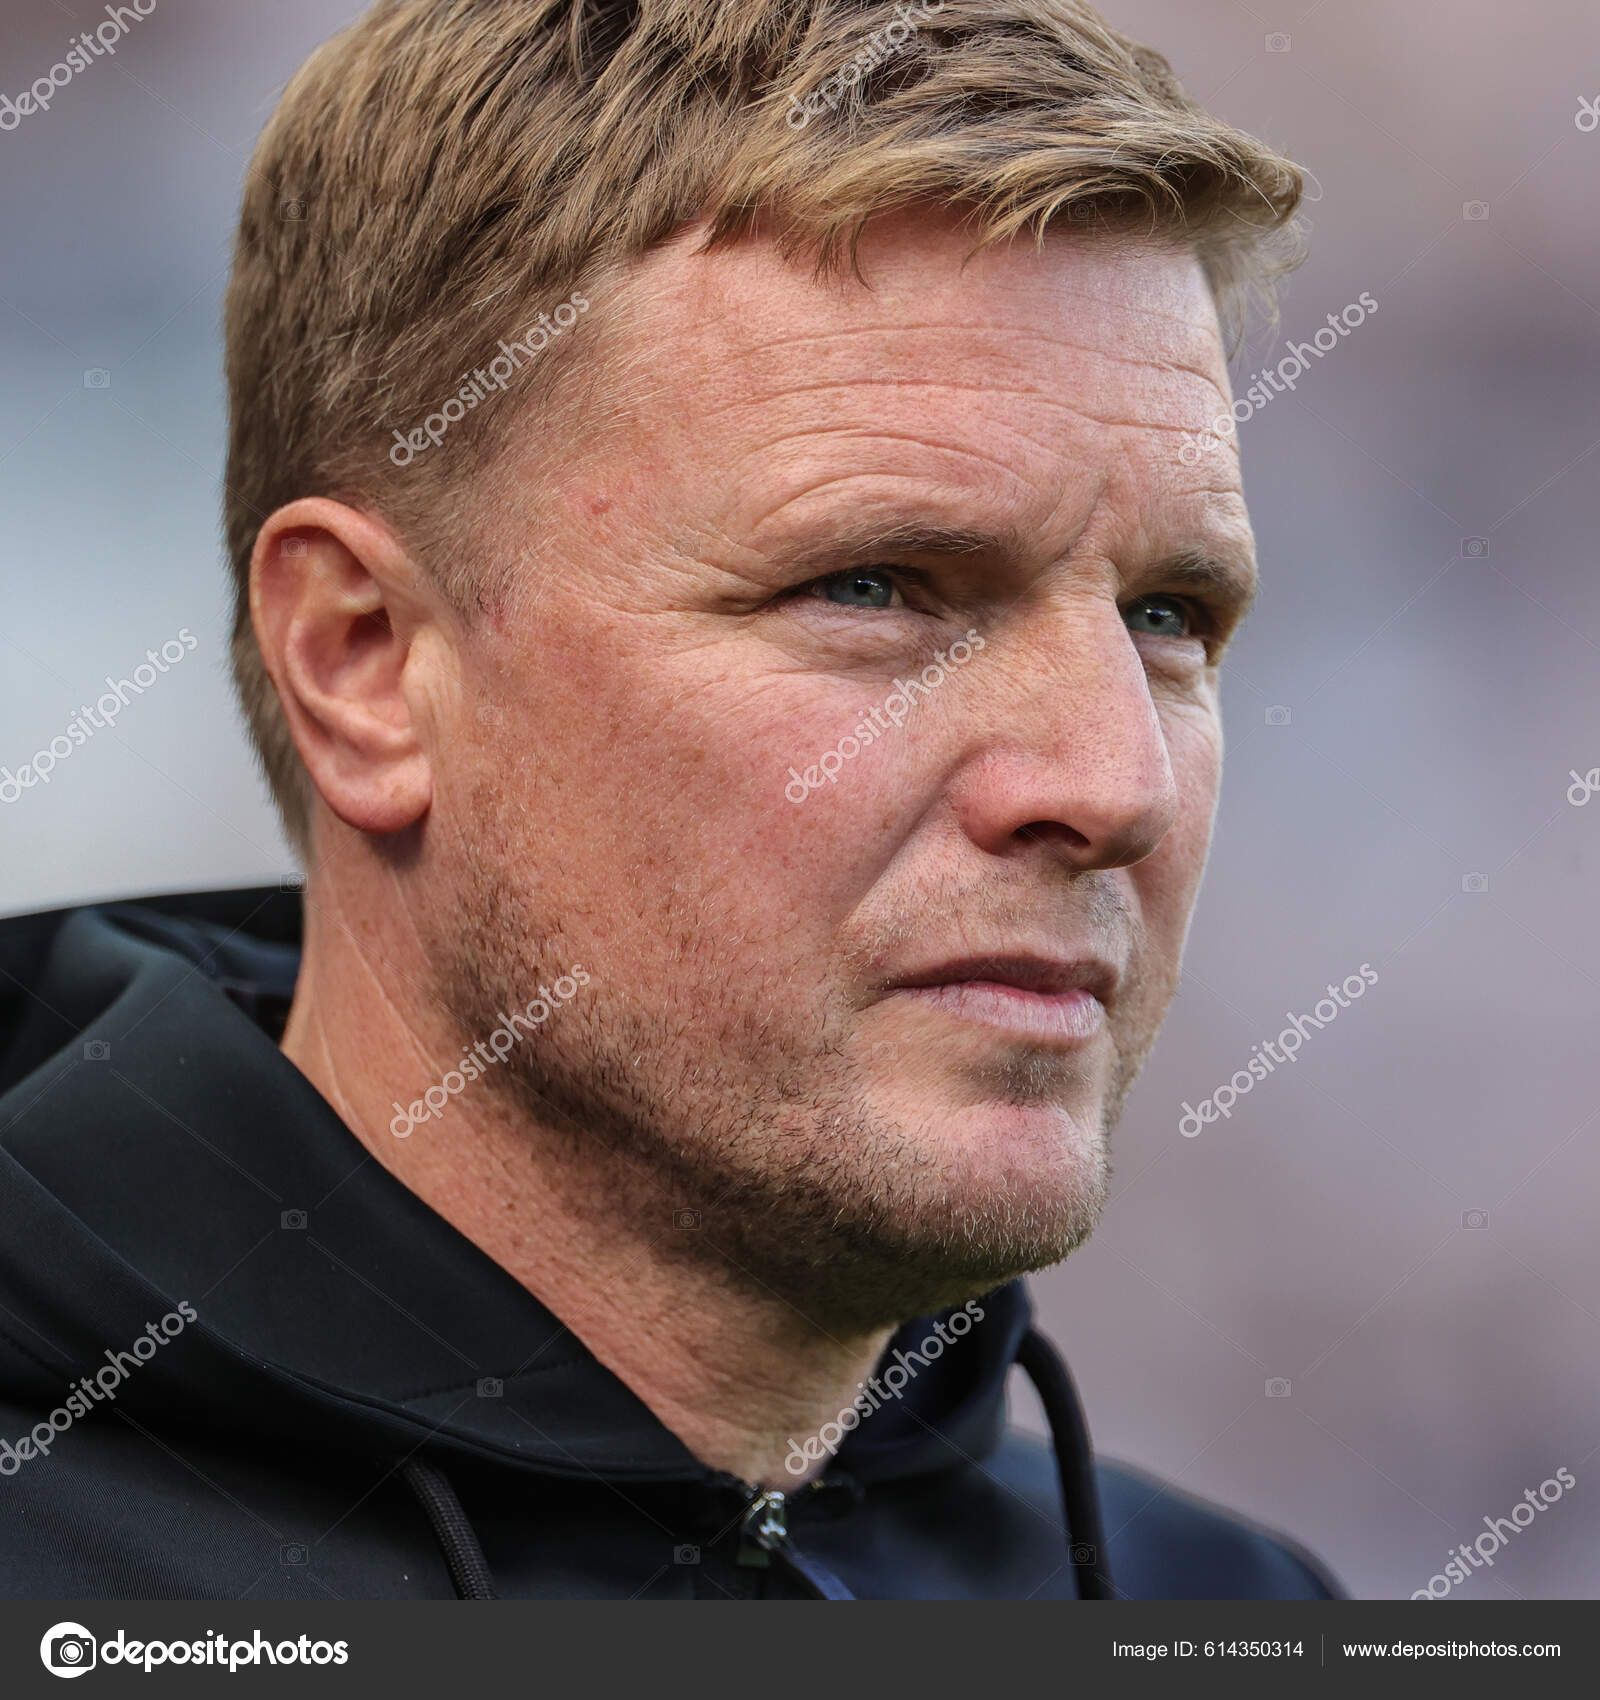 Manager　#614350314　Photo　©　Newcastle　Premier　Match　United　League　Stock　Newcastle　Editorial　United　–　Eddie　Howe